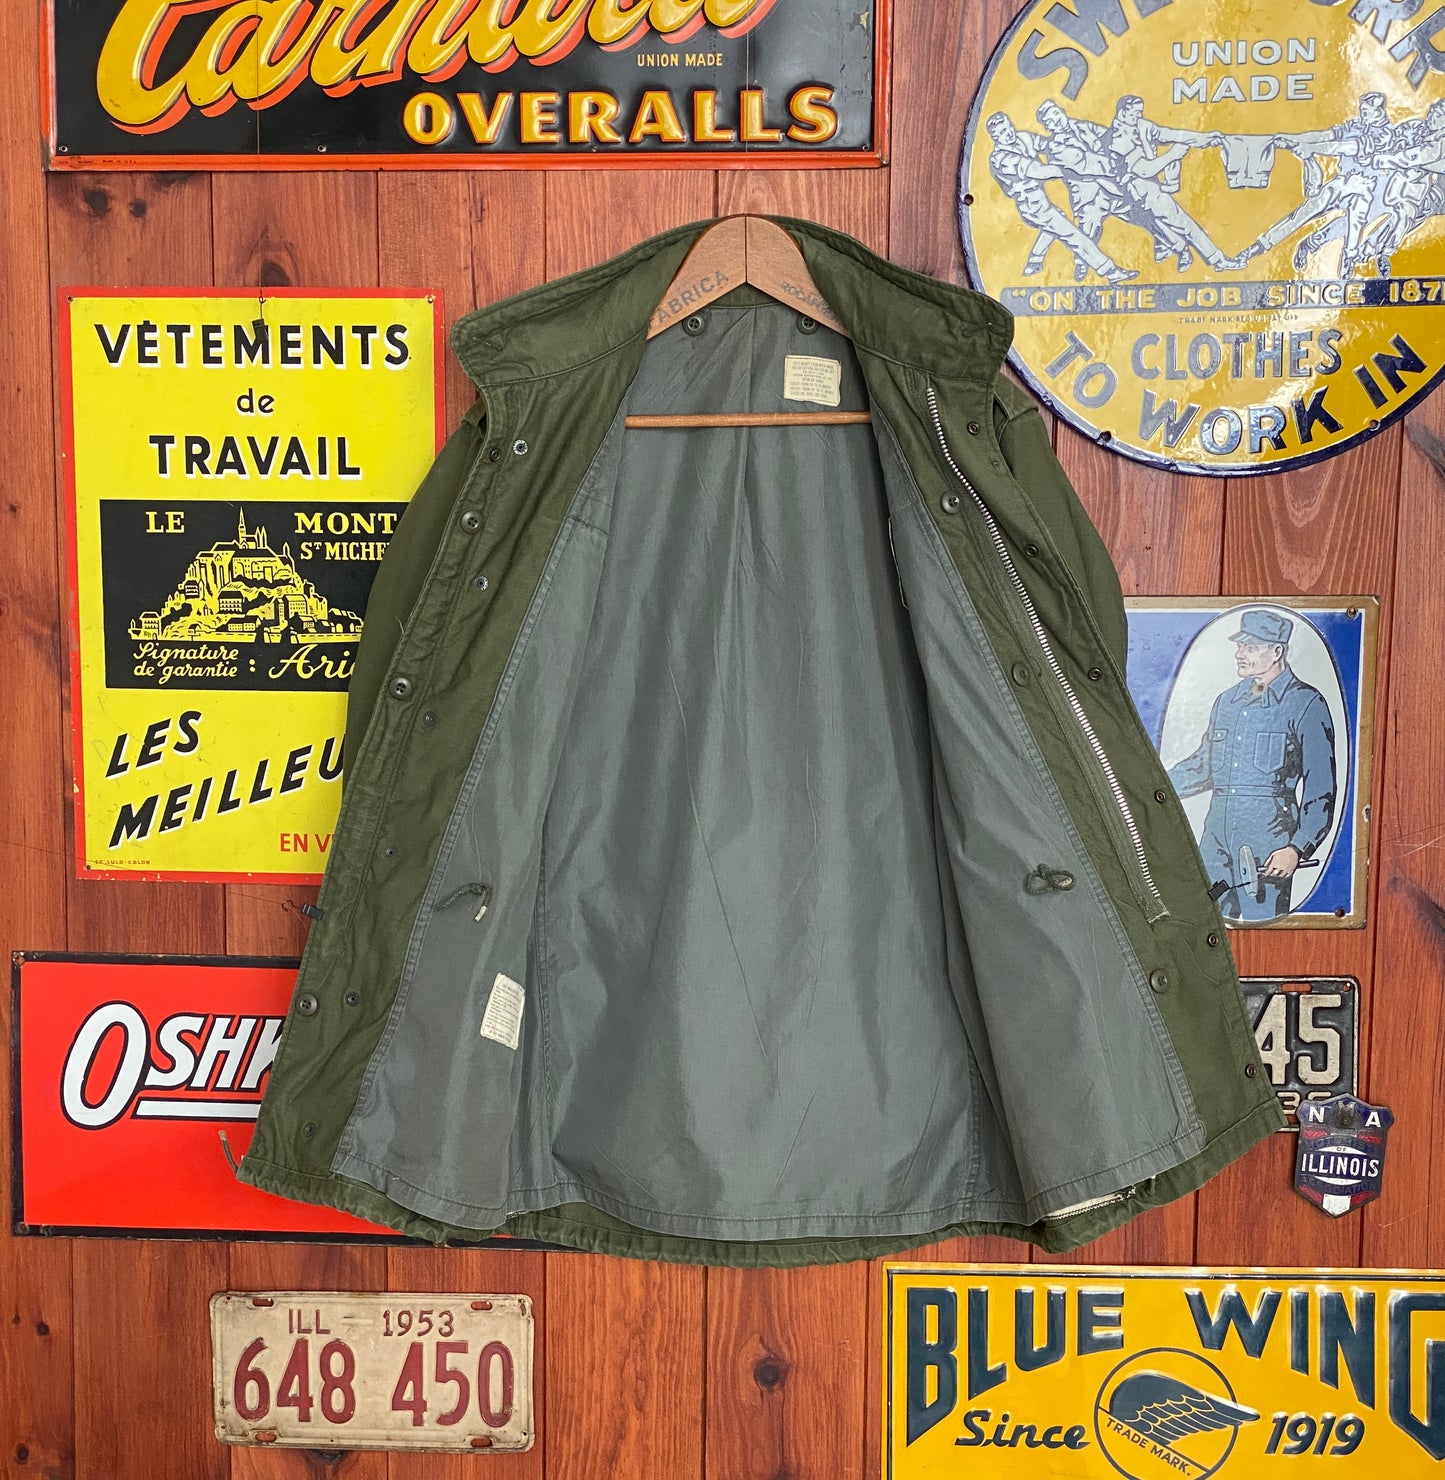 Authentic 1968 US Army Vintage M-65 Field Jacket | Classic Military Apparel with Timeless Style and Durability